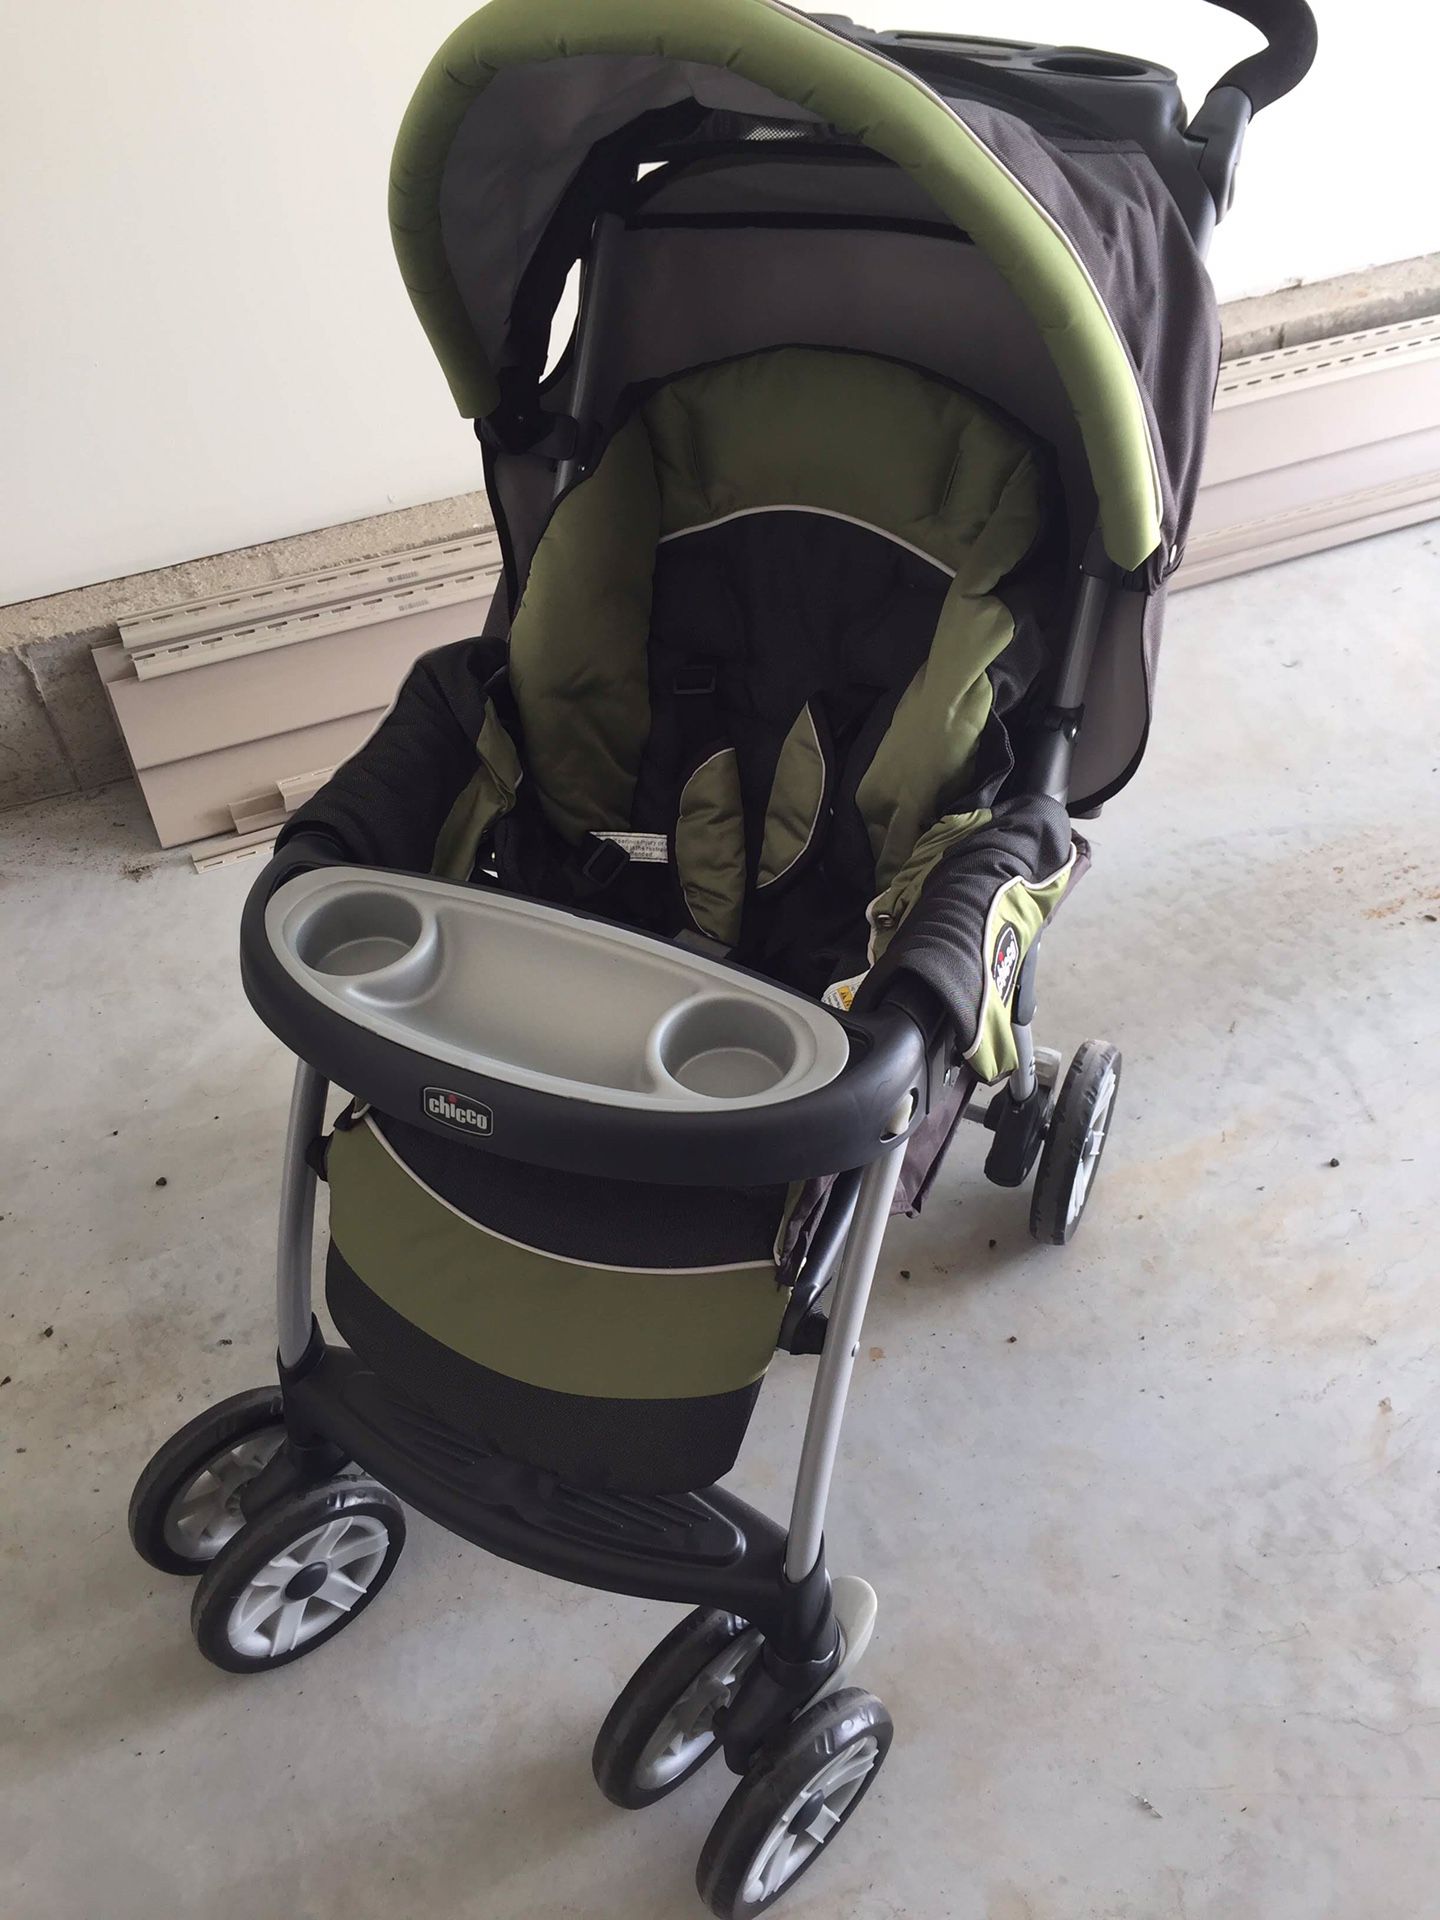 Chicco stroller - excellent condition